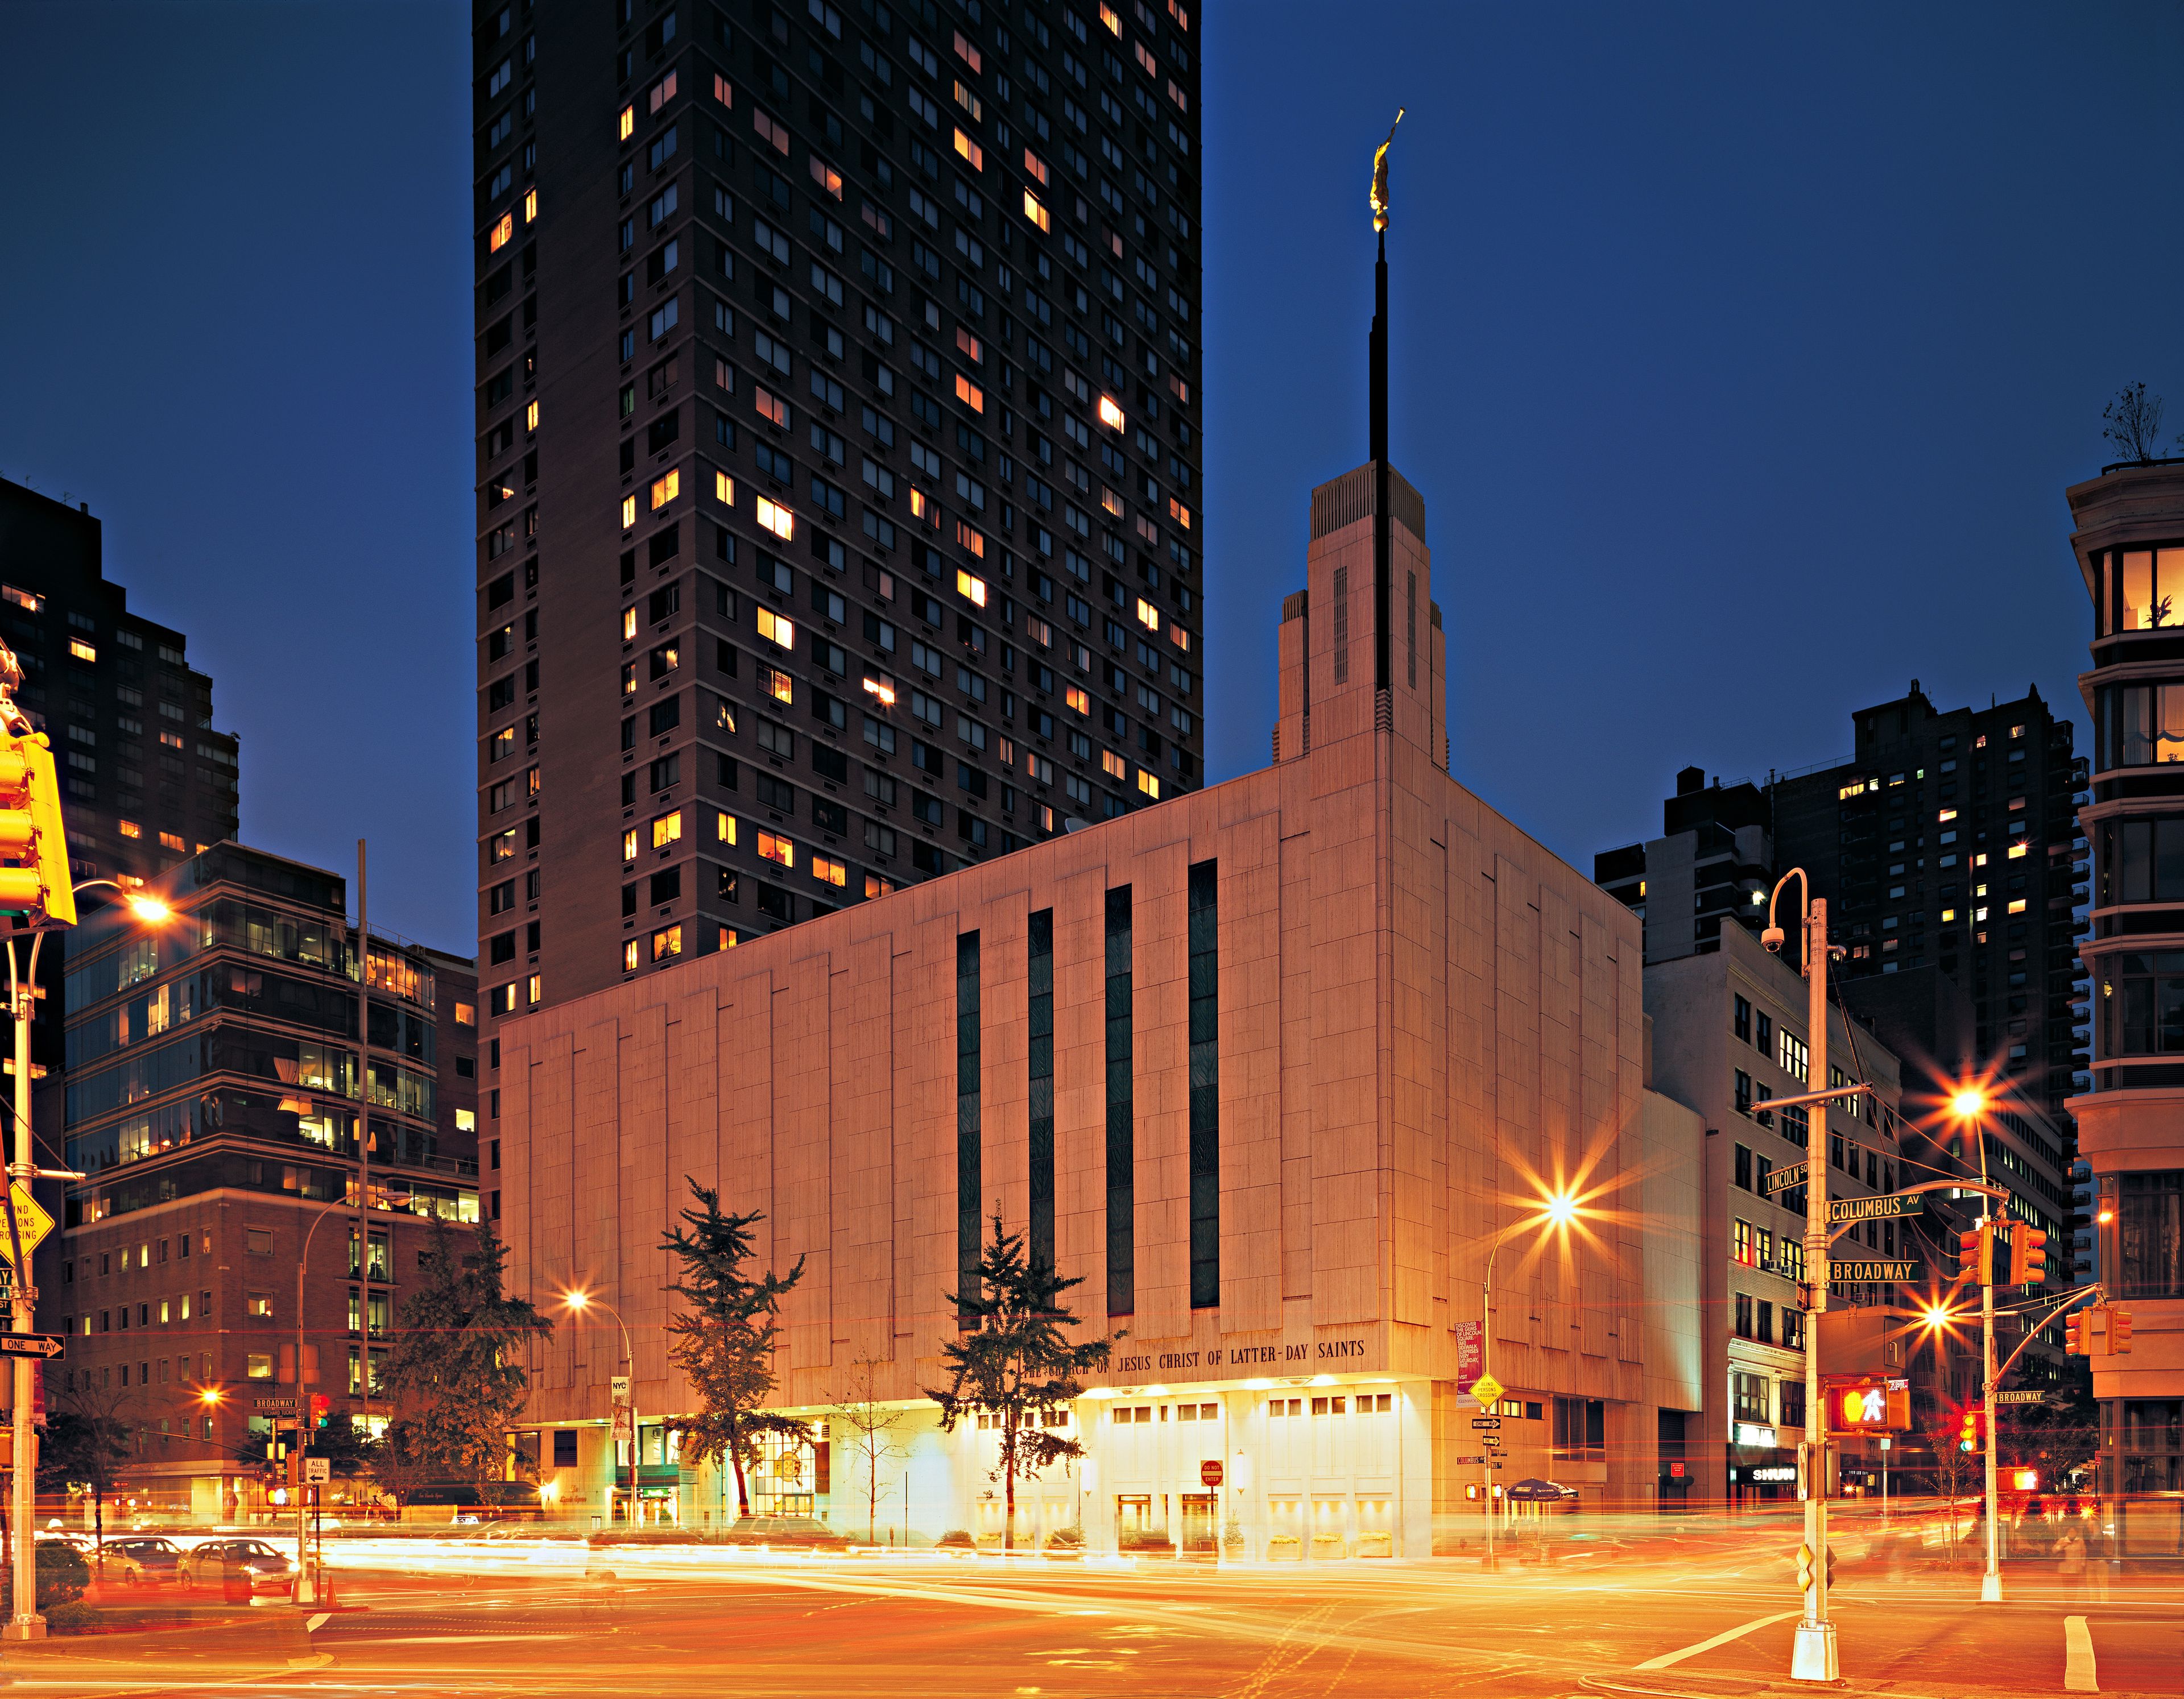 The Manhattan New York Temple in the evening, including the entrance.